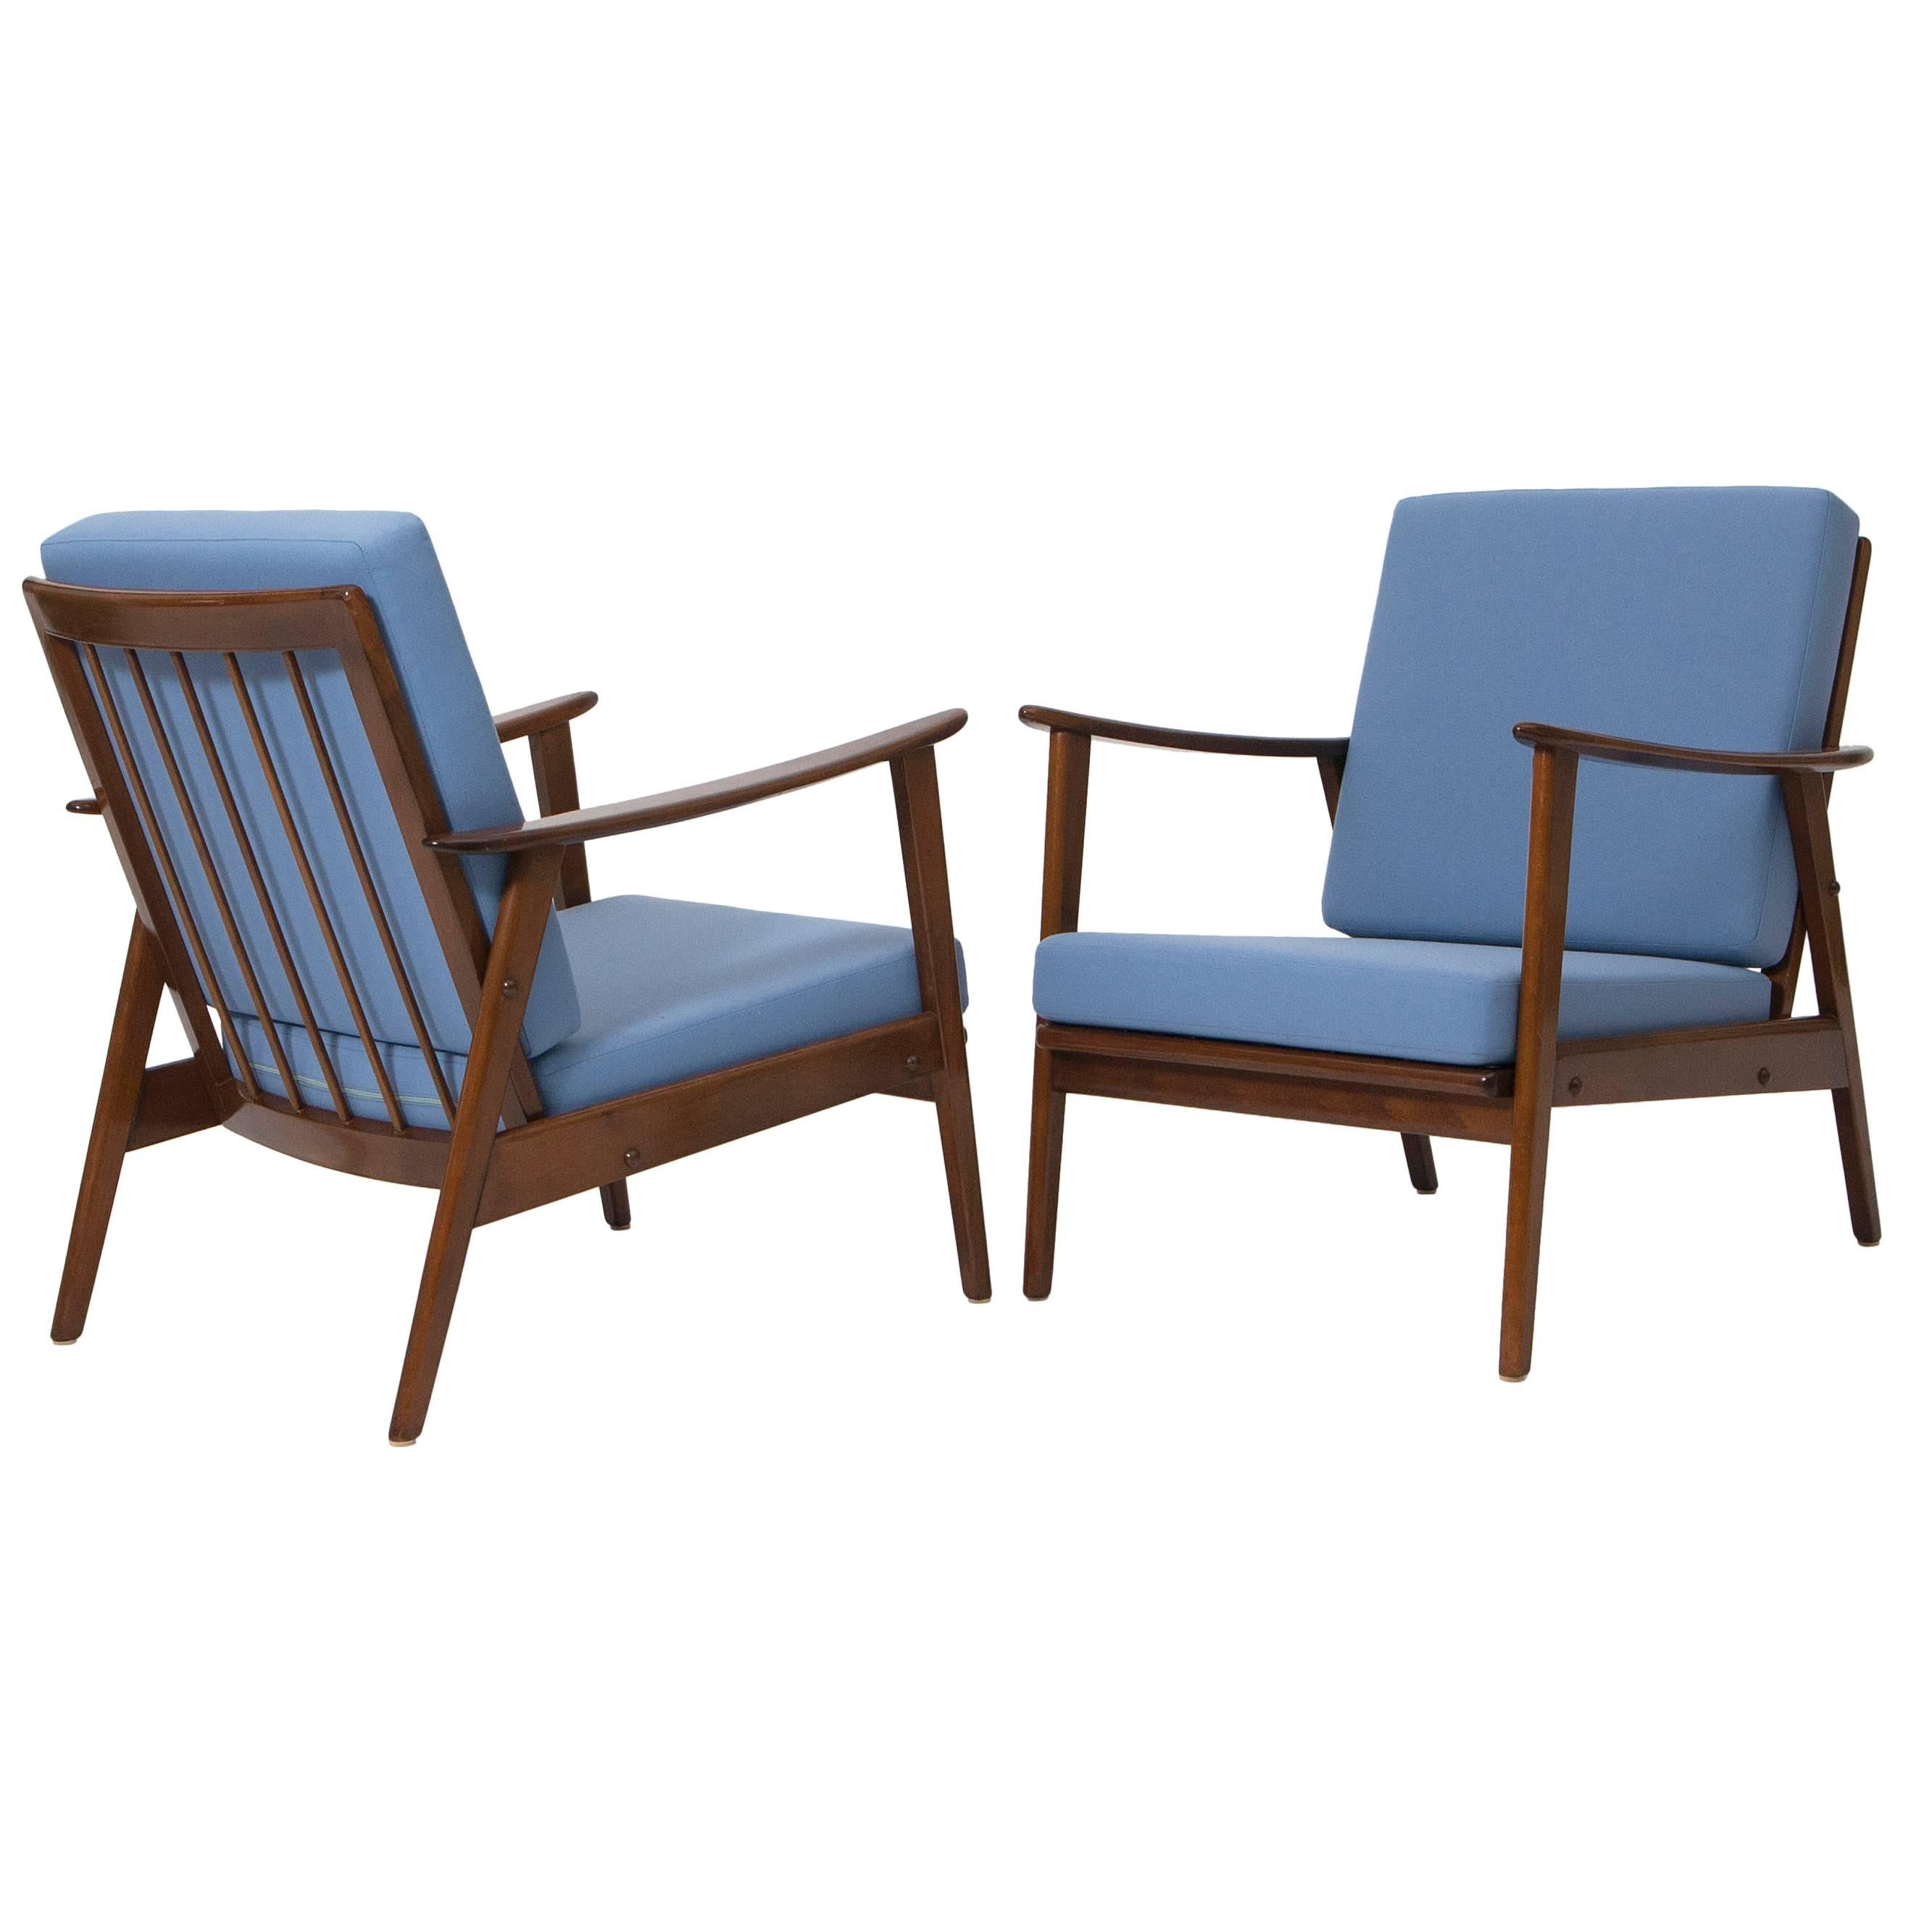 Pair of Mid-Century Modern Easy Chairs, Germany, 1960